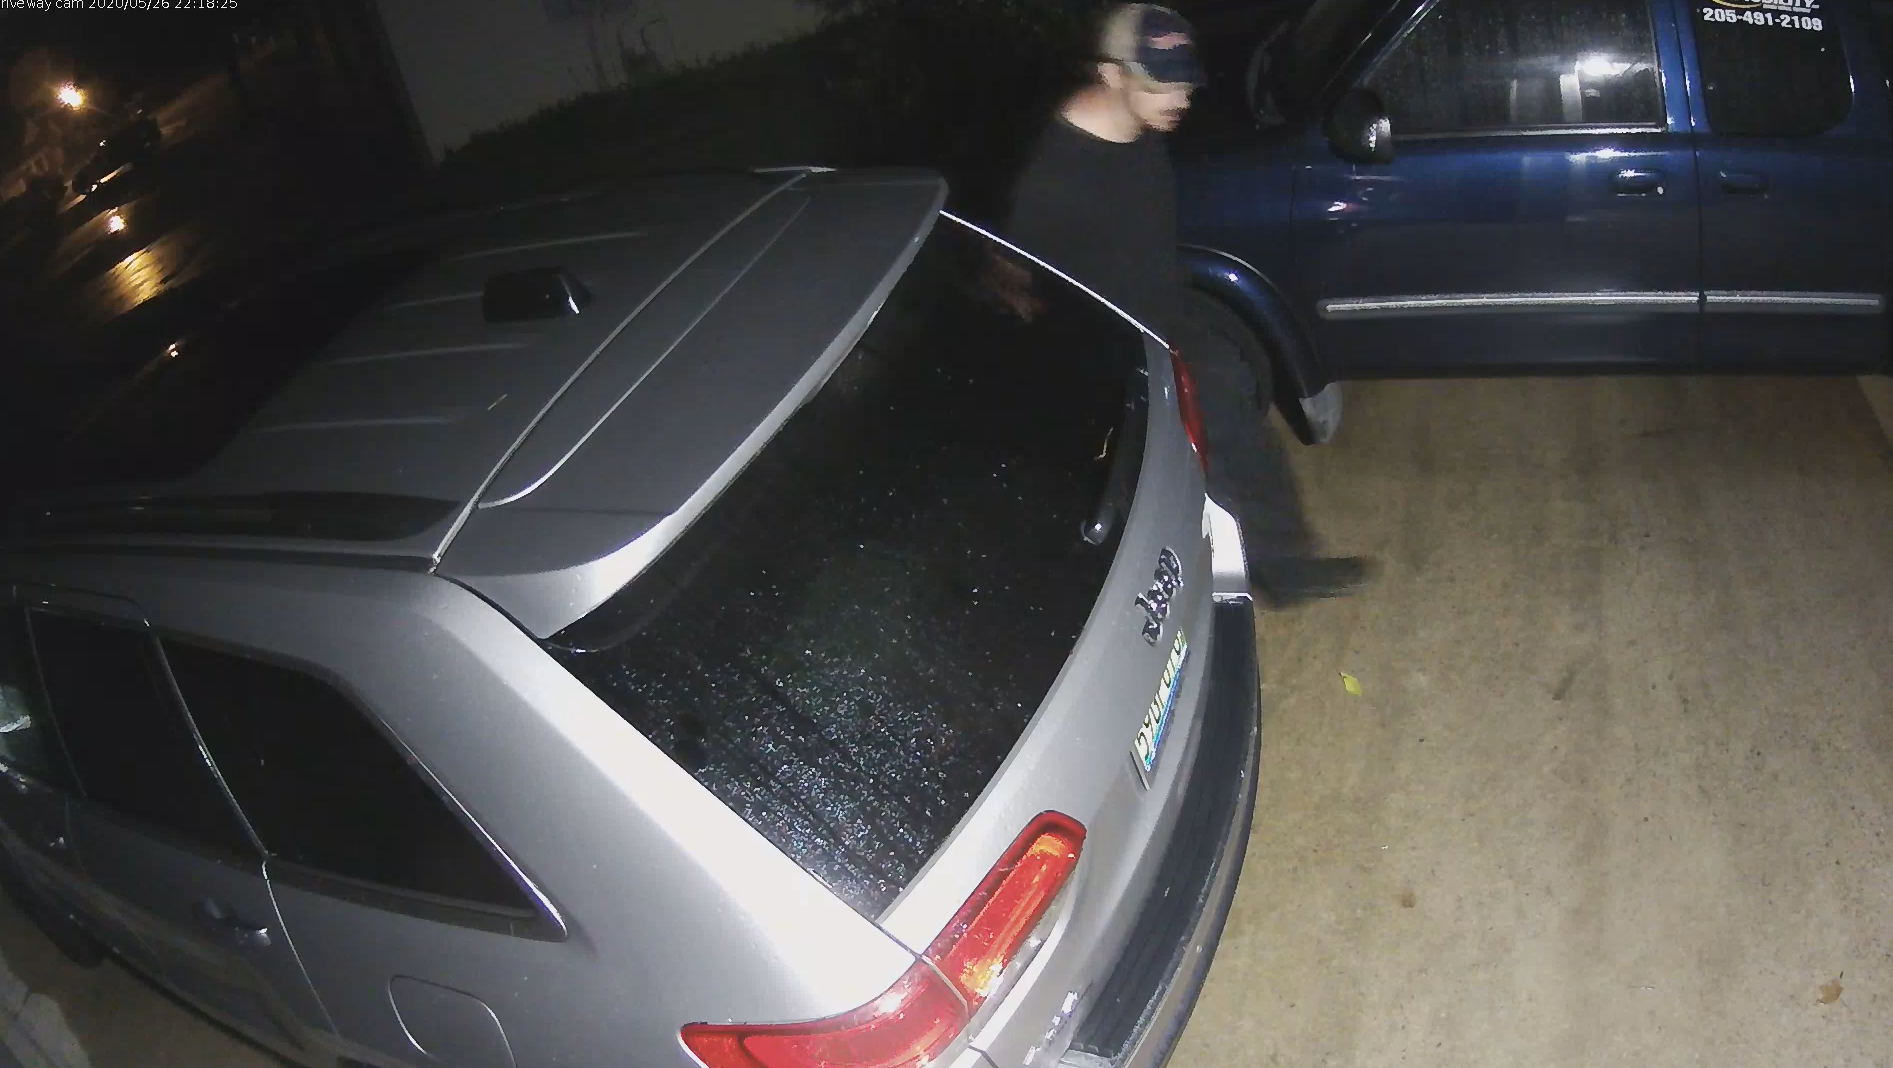 VIDEO: Leeds PD asking for help identifying person in vehicle break-in